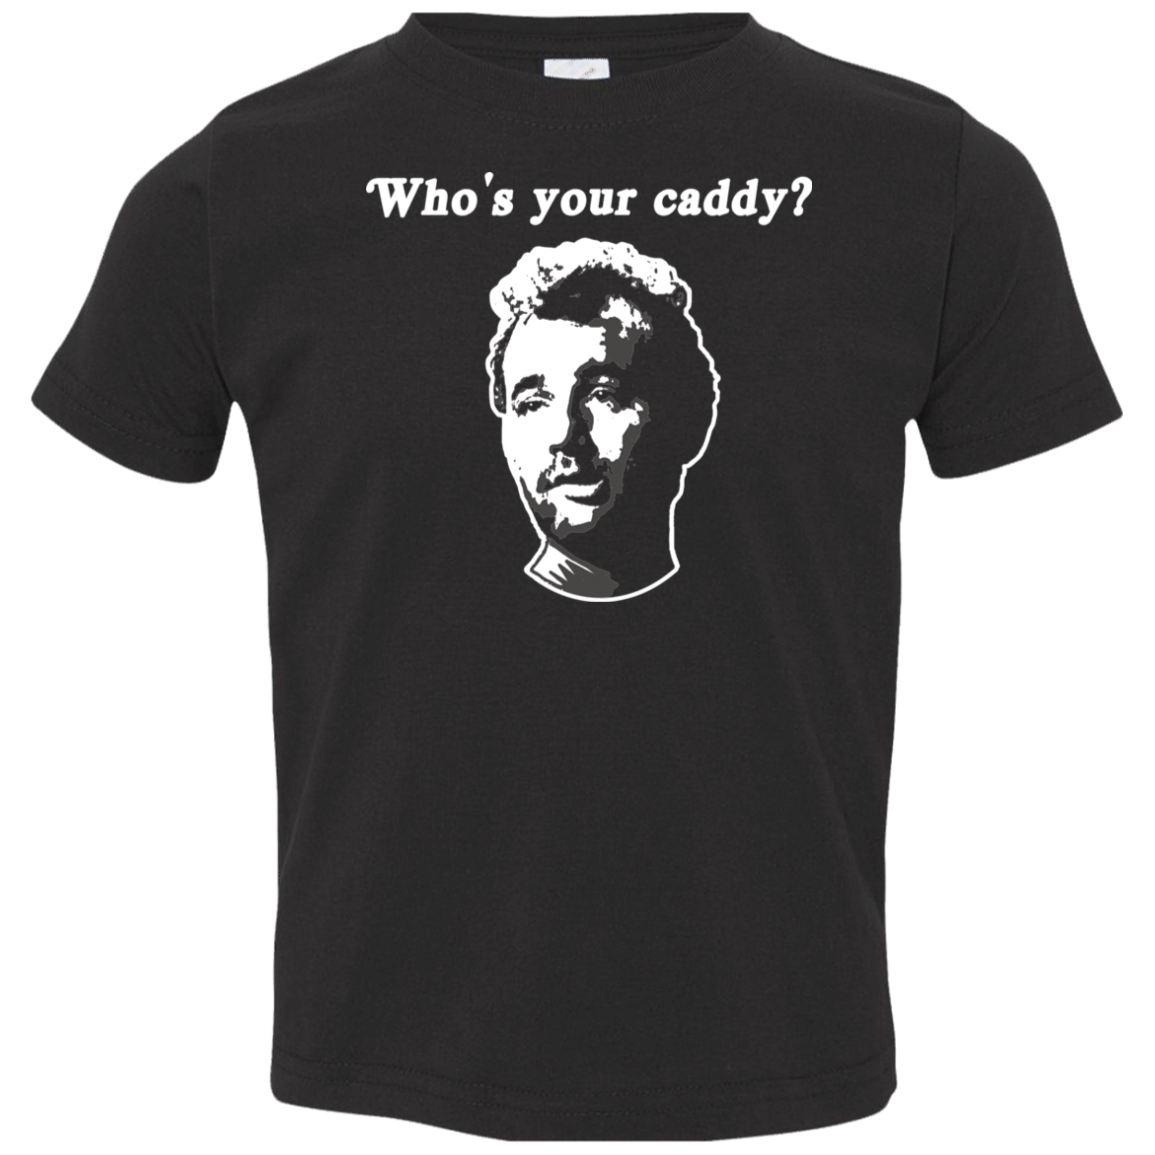 OPG Custom Design #29. Who's Your Caddy? Caddy Shack Bill Murray Fan Art. Toddlers' Cotton T-Shirt